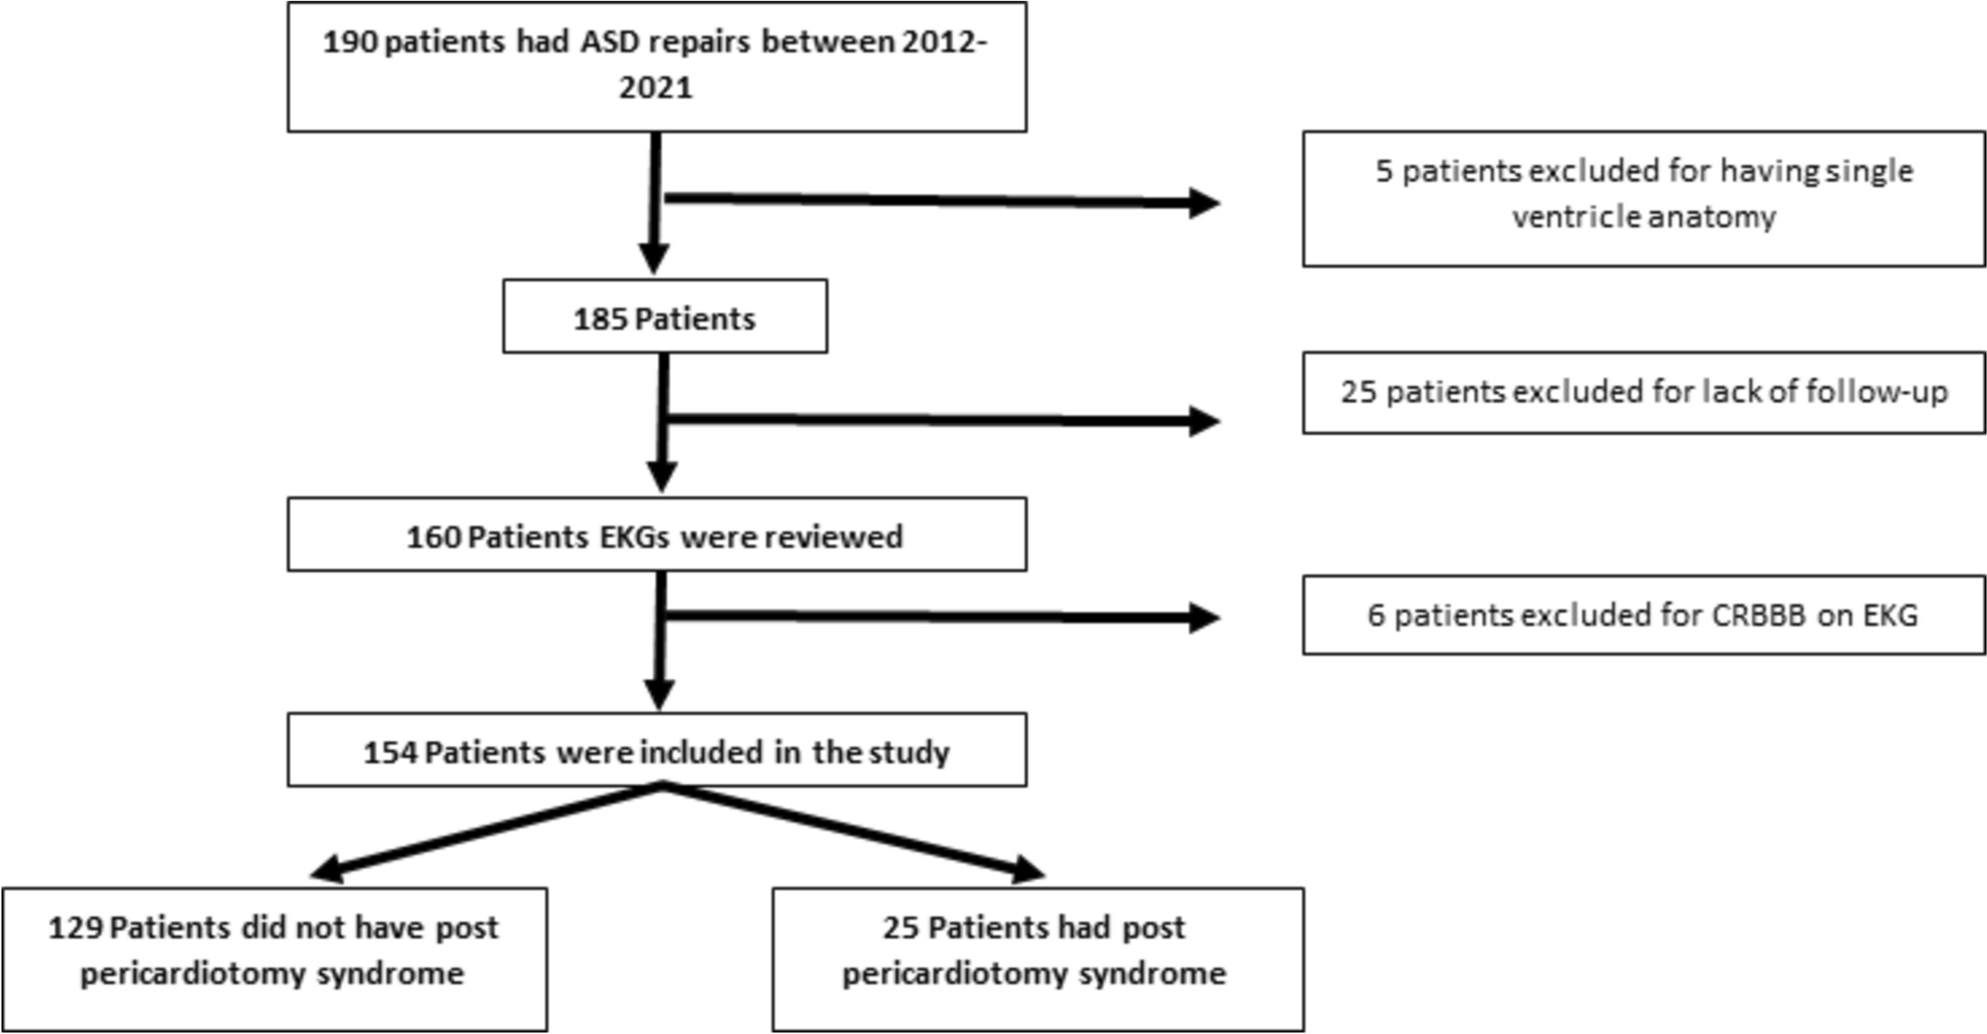 Early Post-operative ECG Changes as a Predictor of Post-pericardiotomy Syndrome Following Atrial Septal Defect Repair